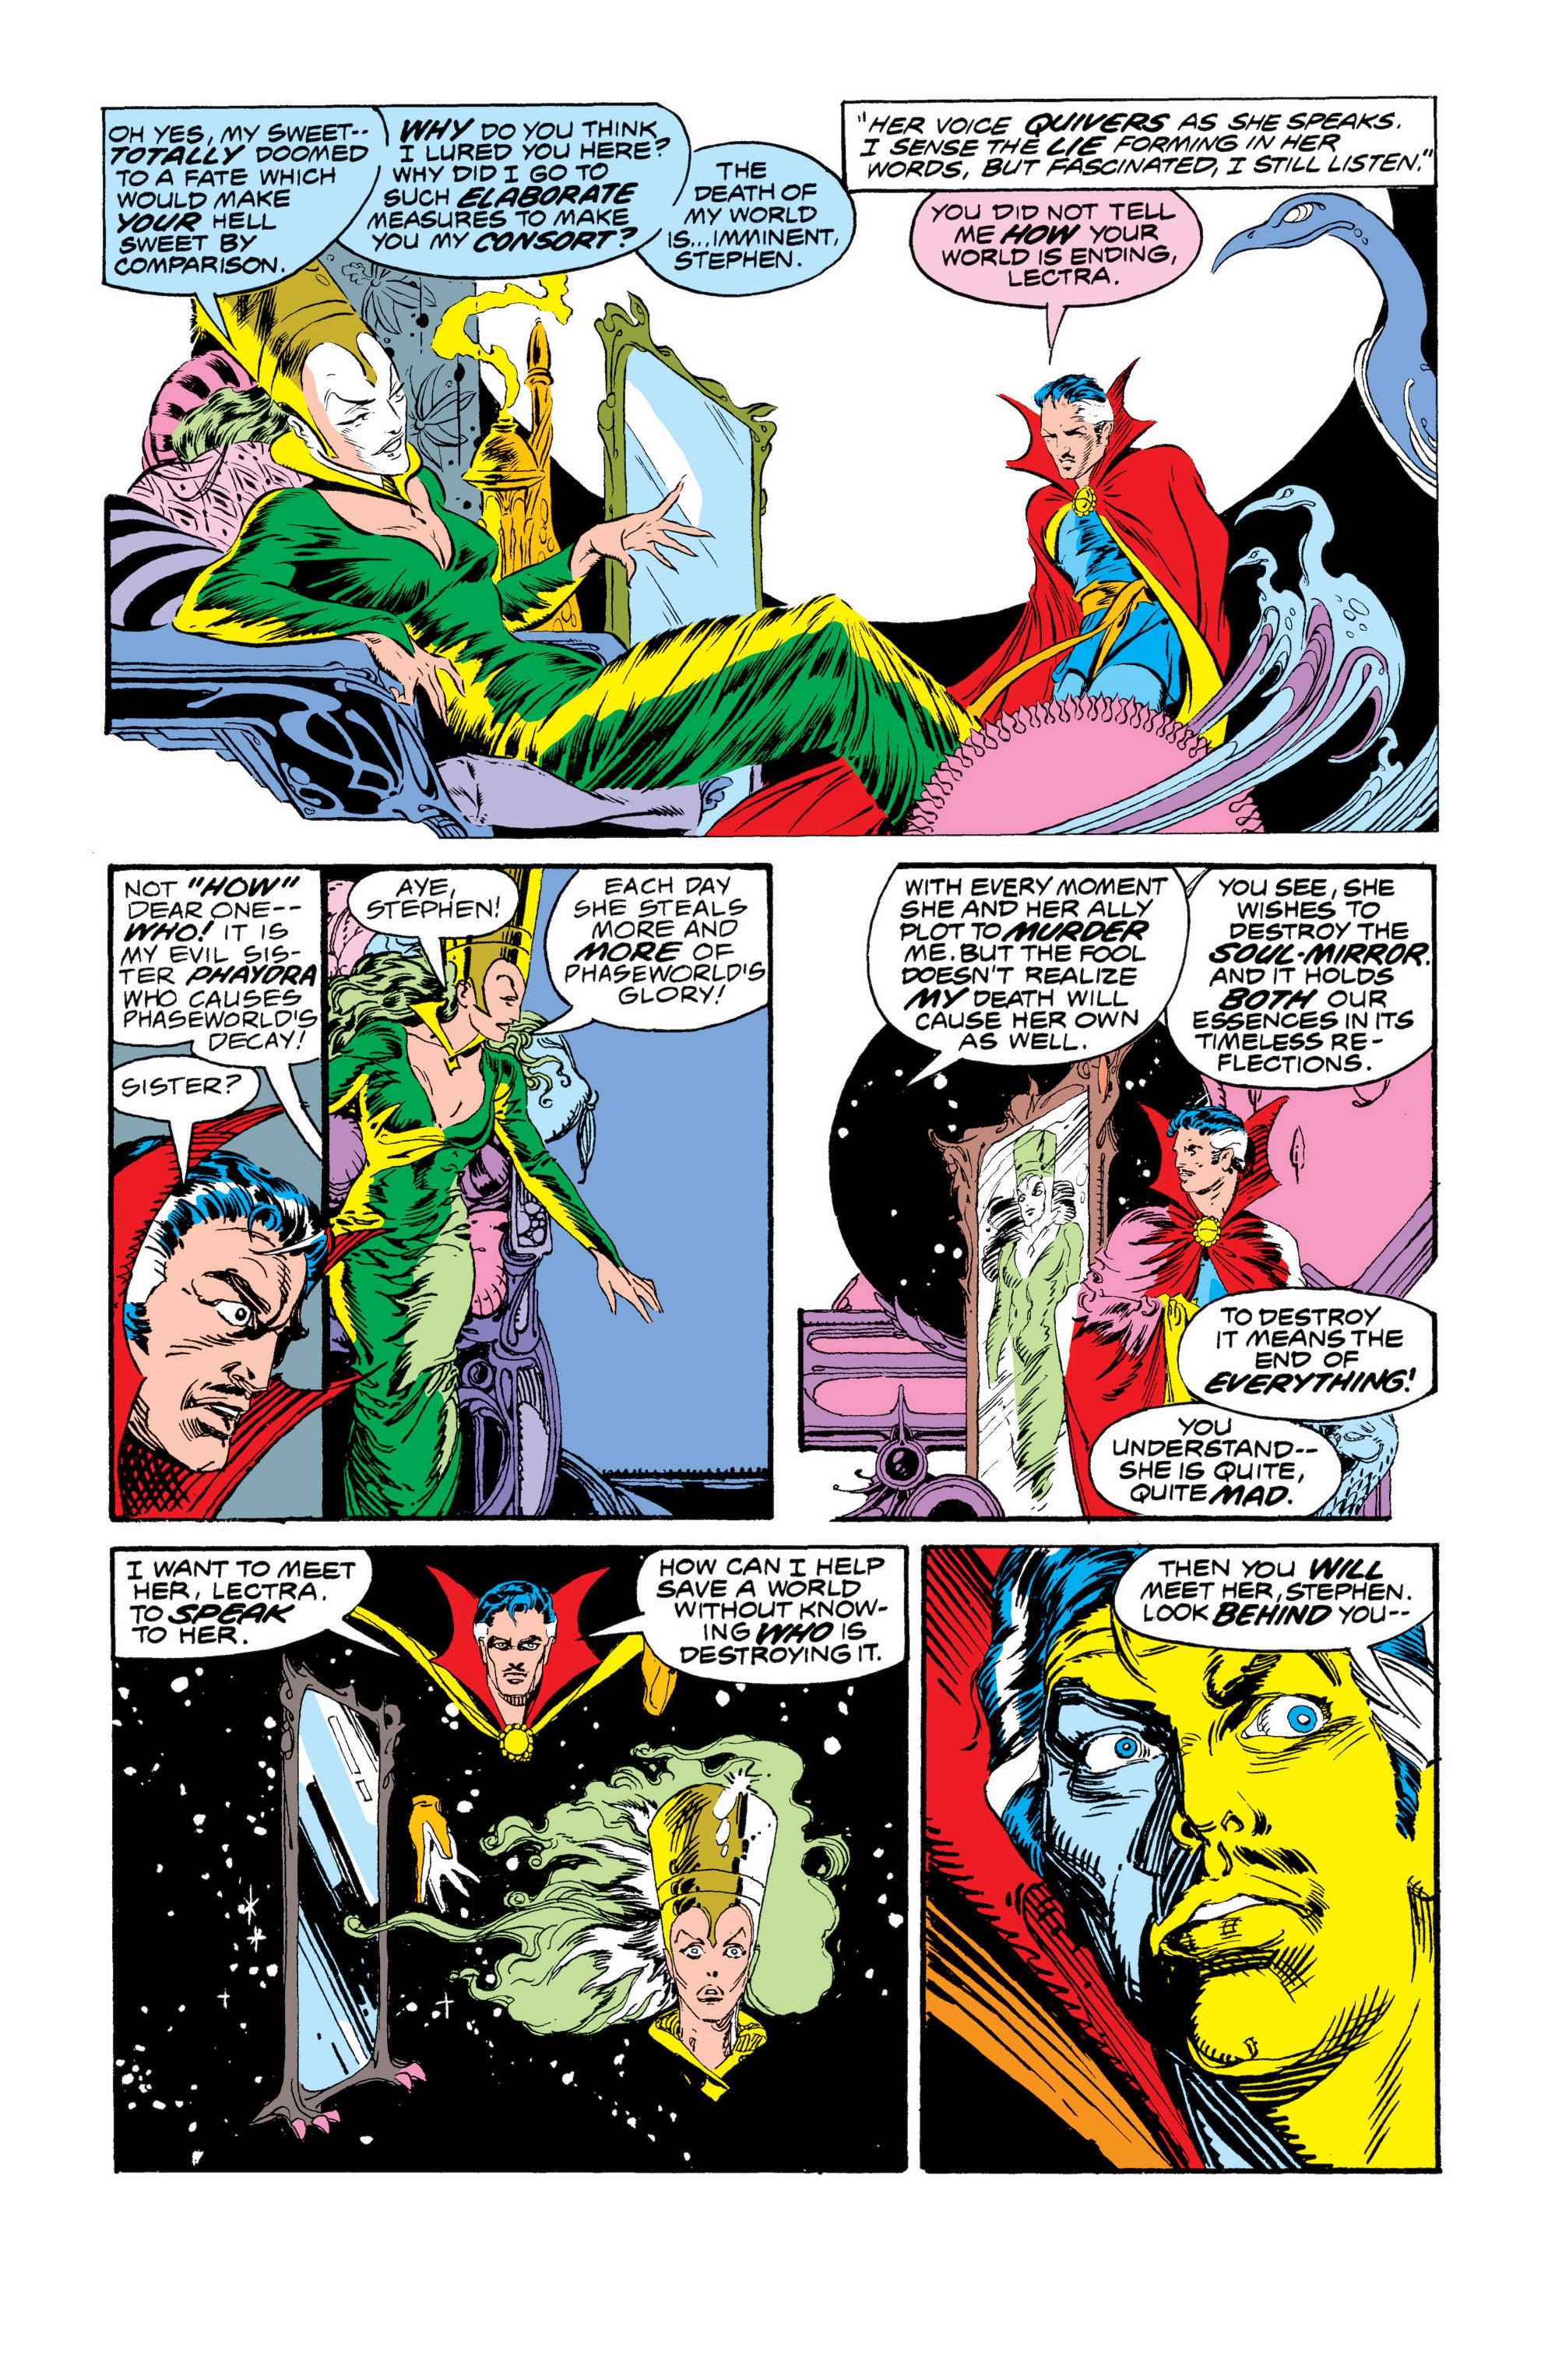 Read online Doctor Strange: What Is It That Disturbs You, Stephen? comic -  Issue # TPB - 82